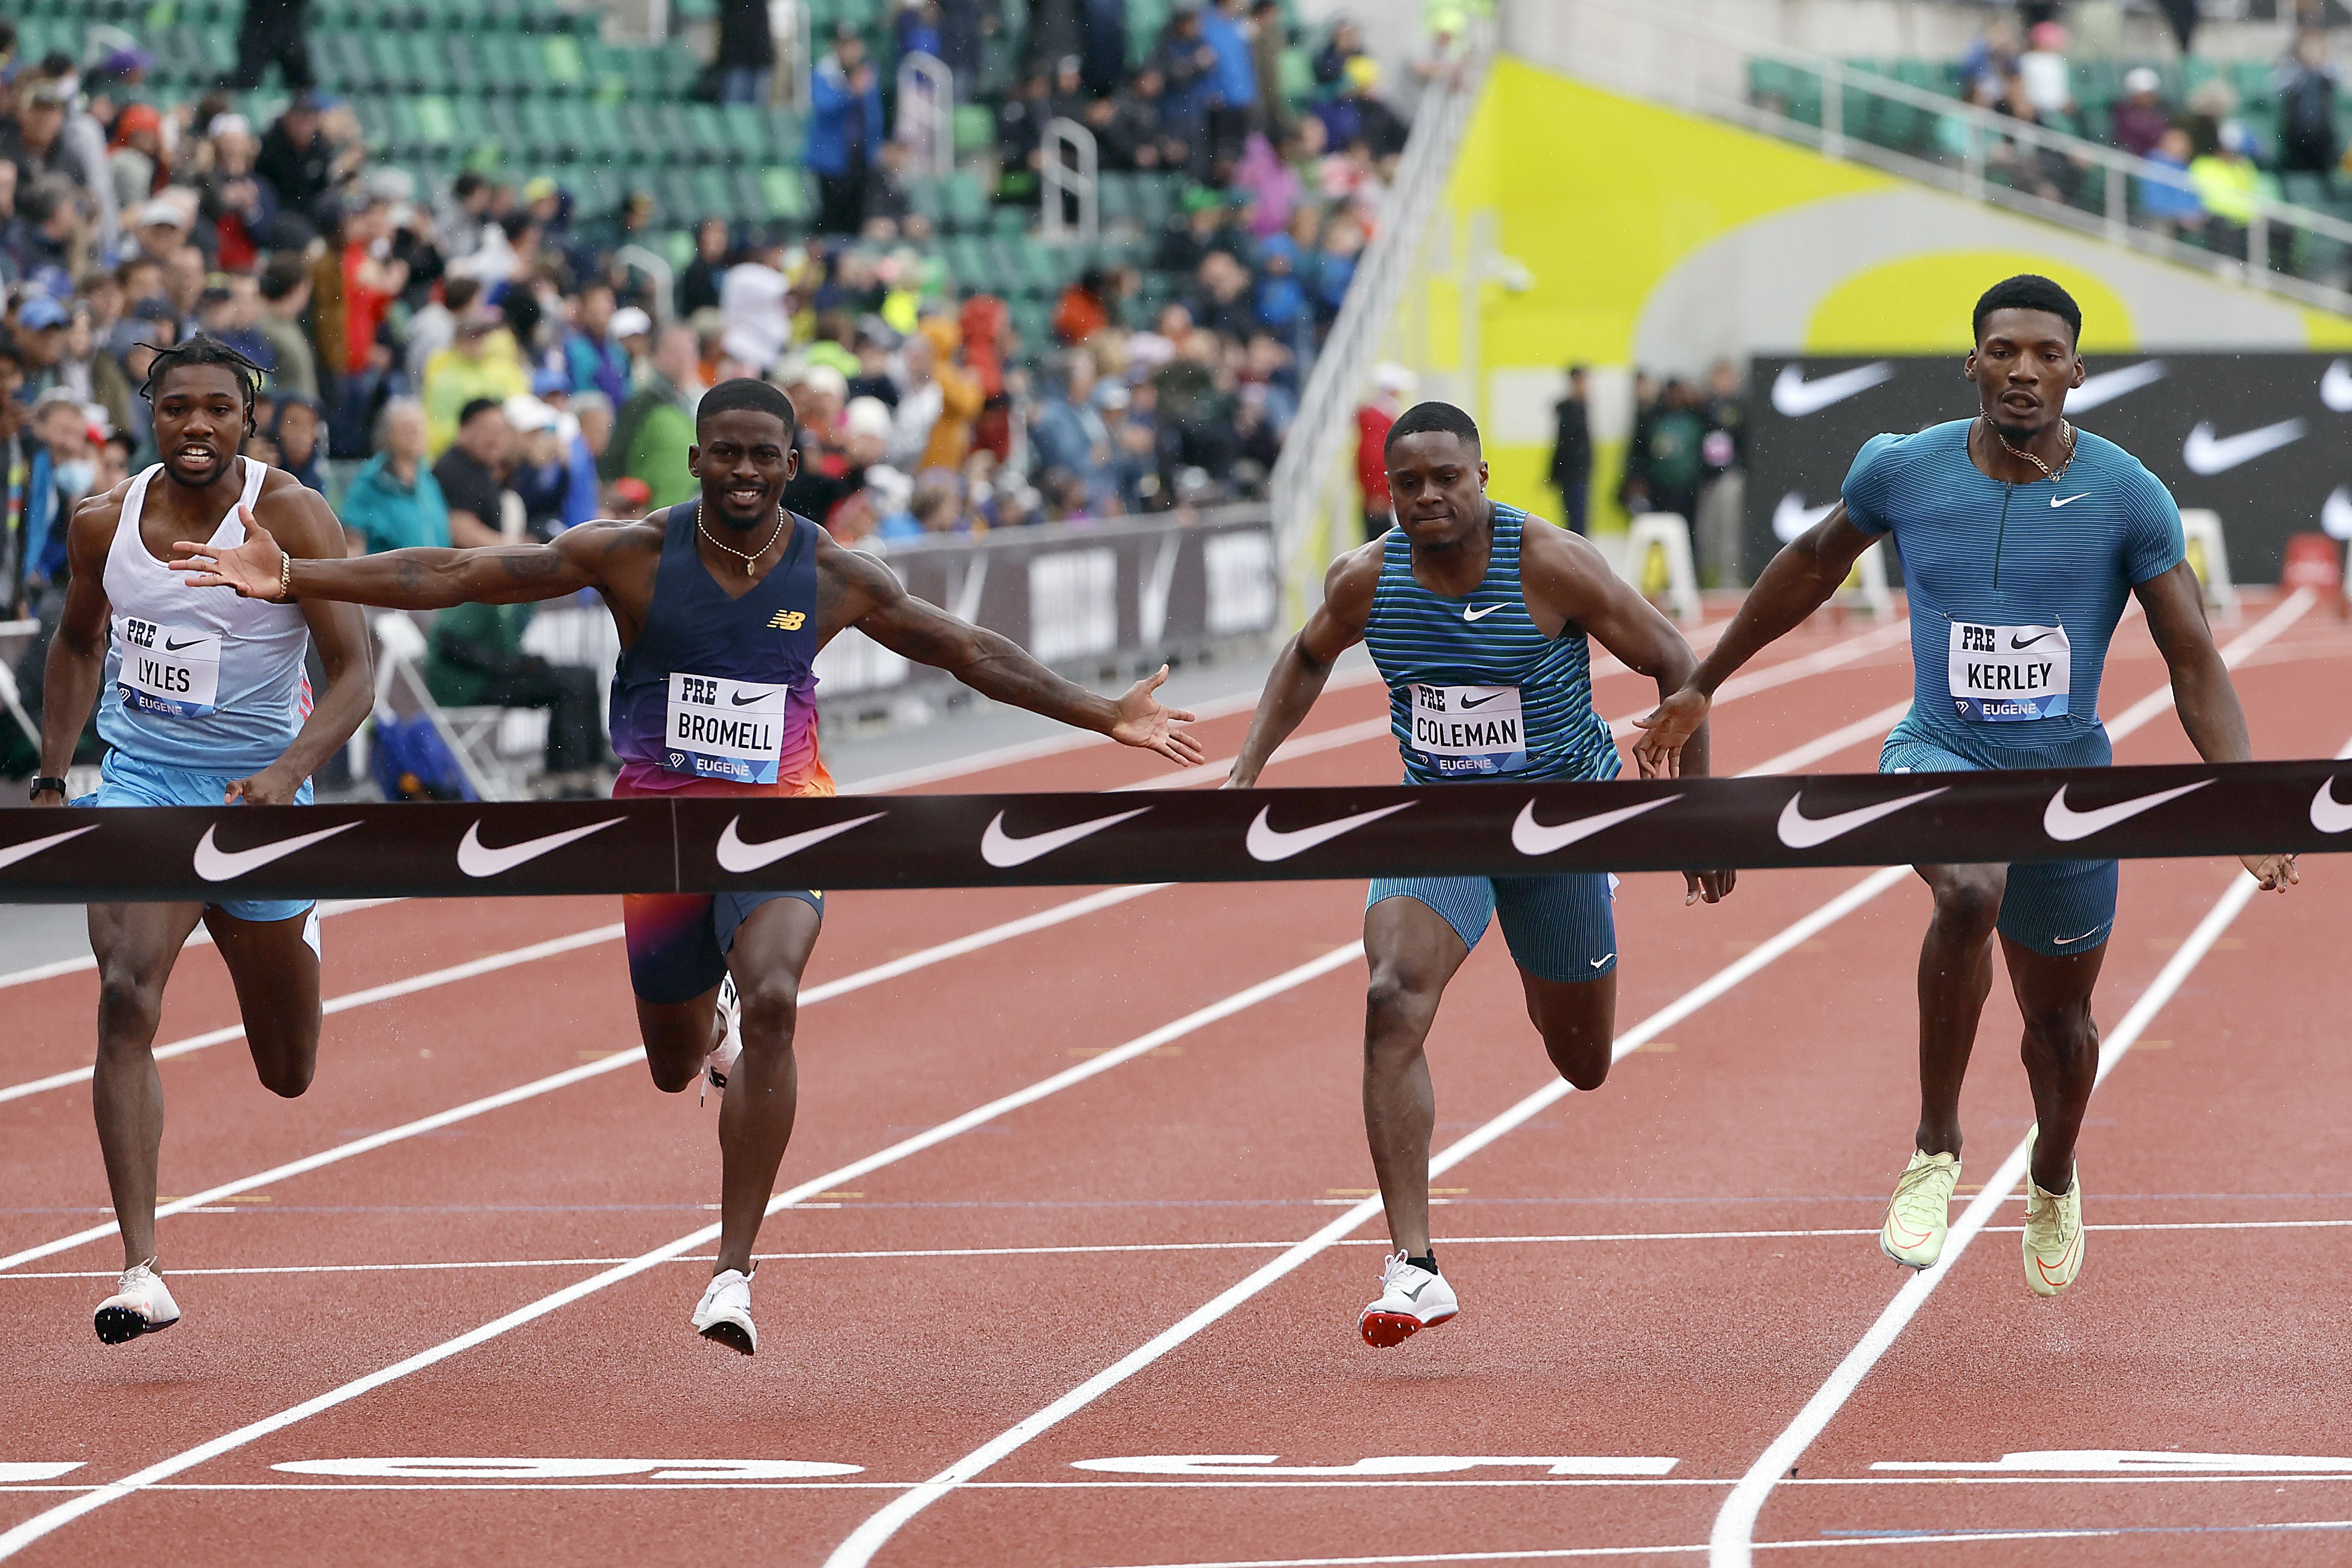 How to Watch the 2022 World Athletics Championships Streaming and Broadcast Information